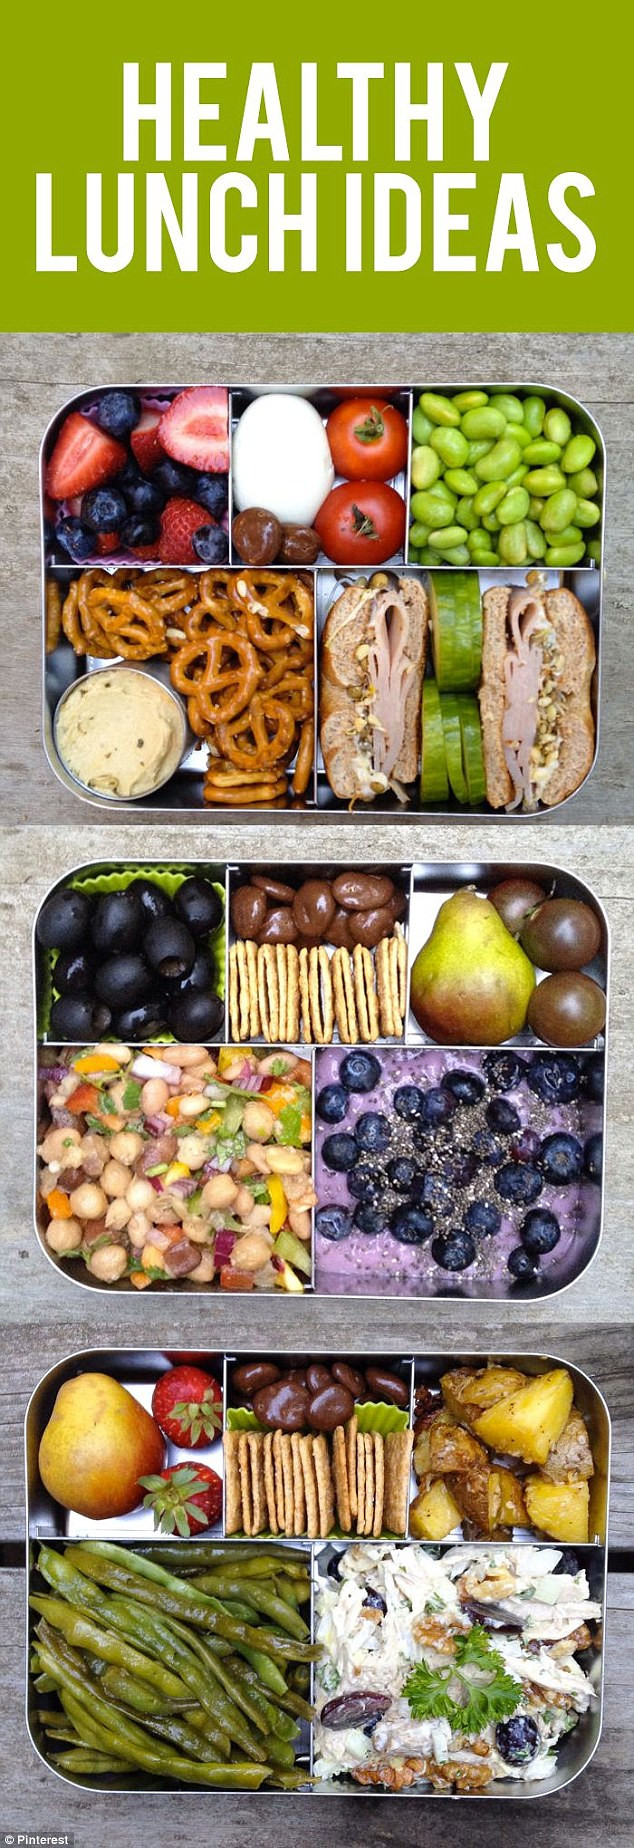 Quick Easy Healthy Lunches For Work
 Pinterest reveals the top food trends for 2016 with